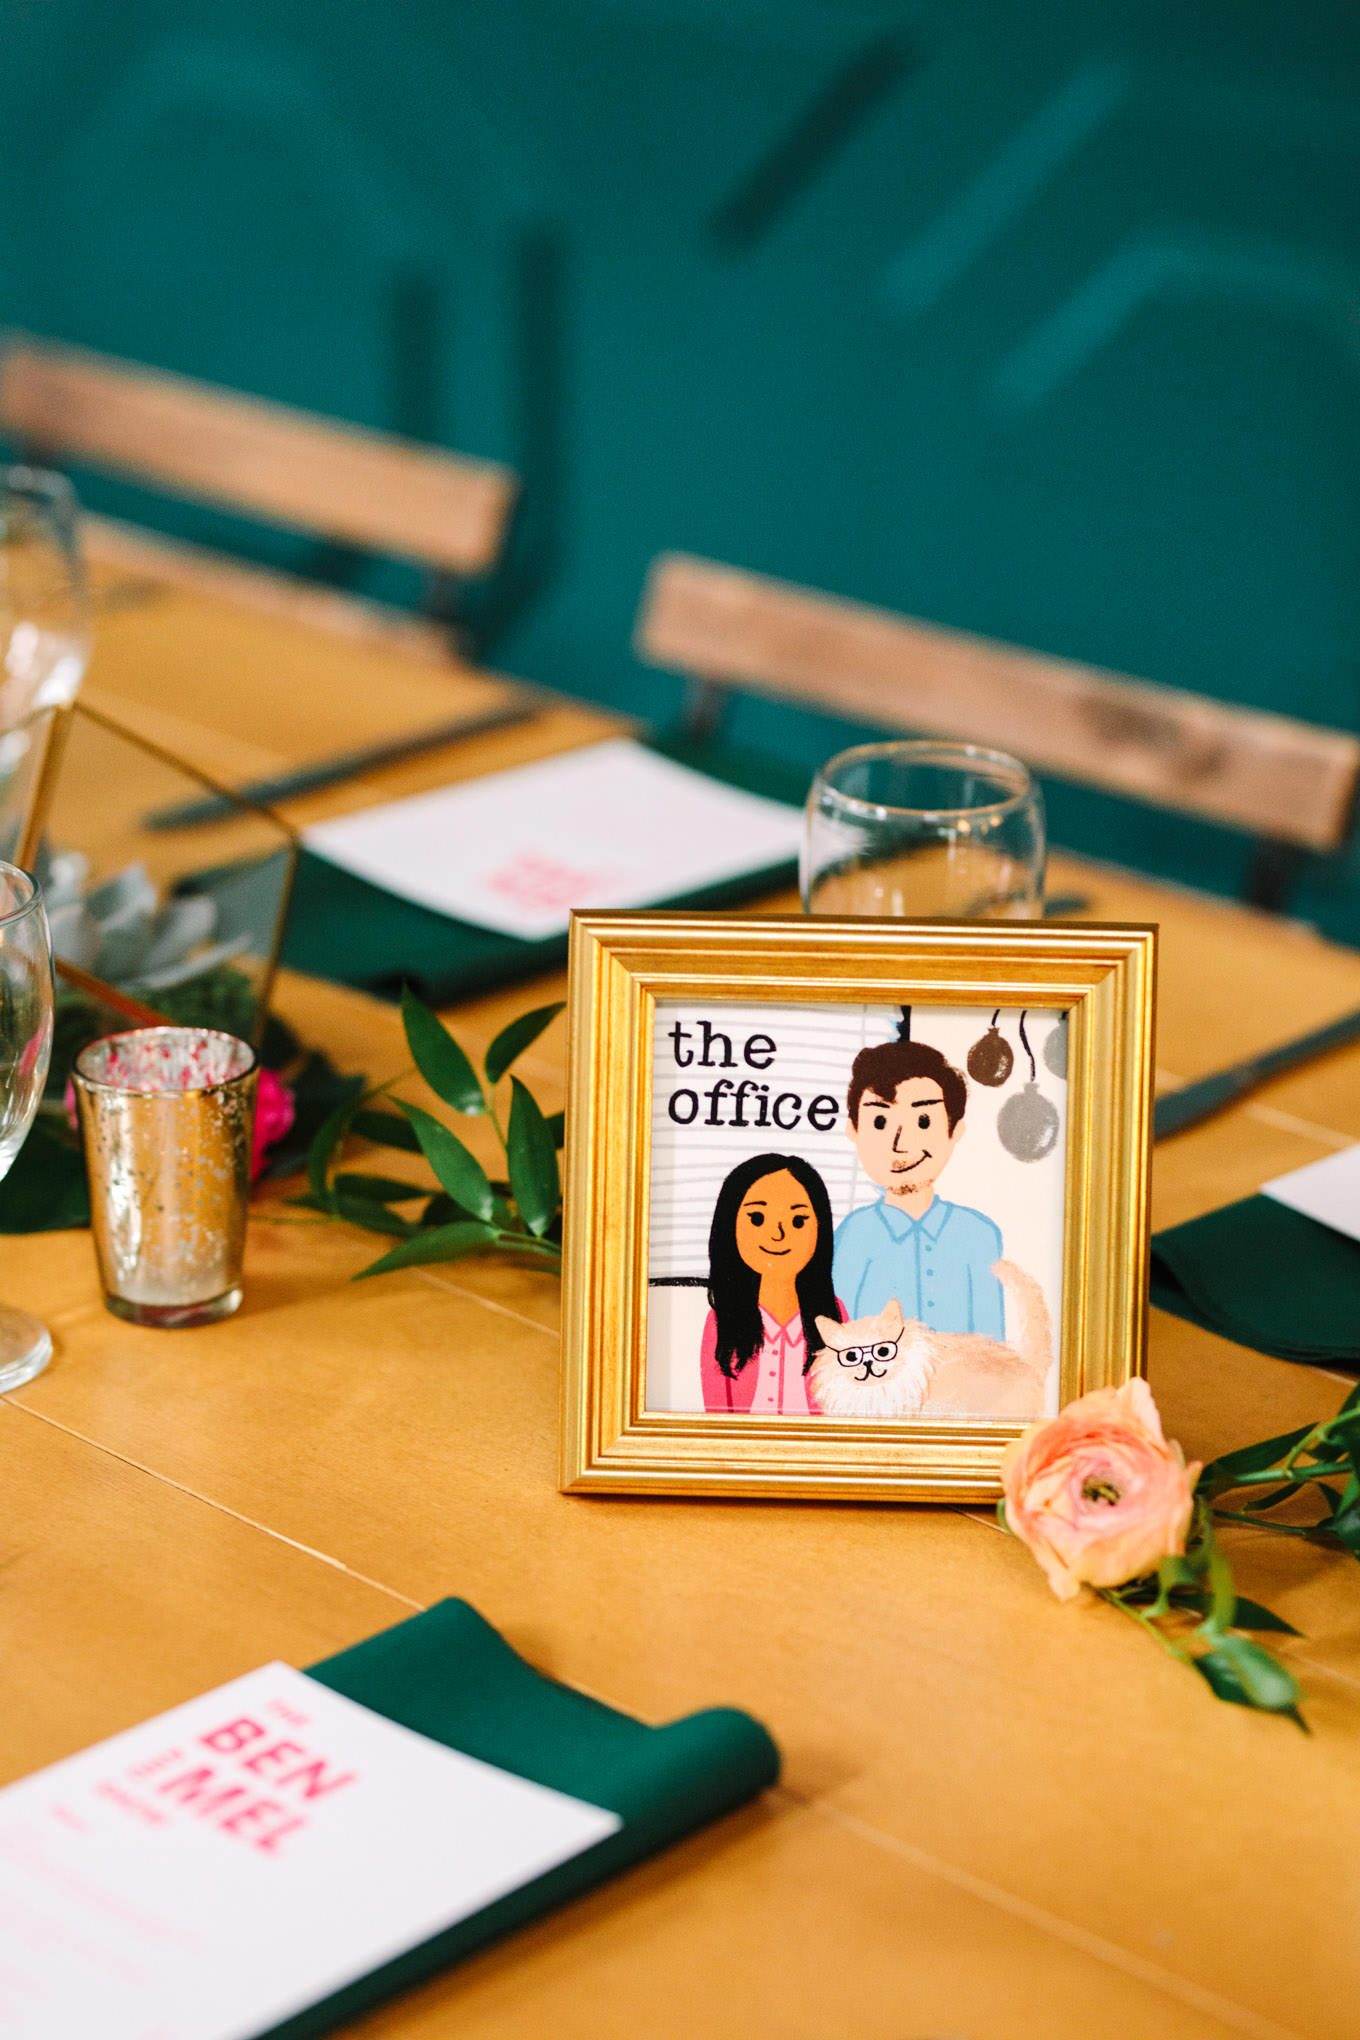 Custom table signs of TV shows featuring the bride and groom | Engagement, elopement, and wedding photography roundup of Mary Costa’s favorite images from 2020 | Colorful and elevated photography for fun-loving couples in Southern California | #2020wedding #elopement #weddingphoto #weddingphotography   Source: Mary Costa Photography | Los Angeles 